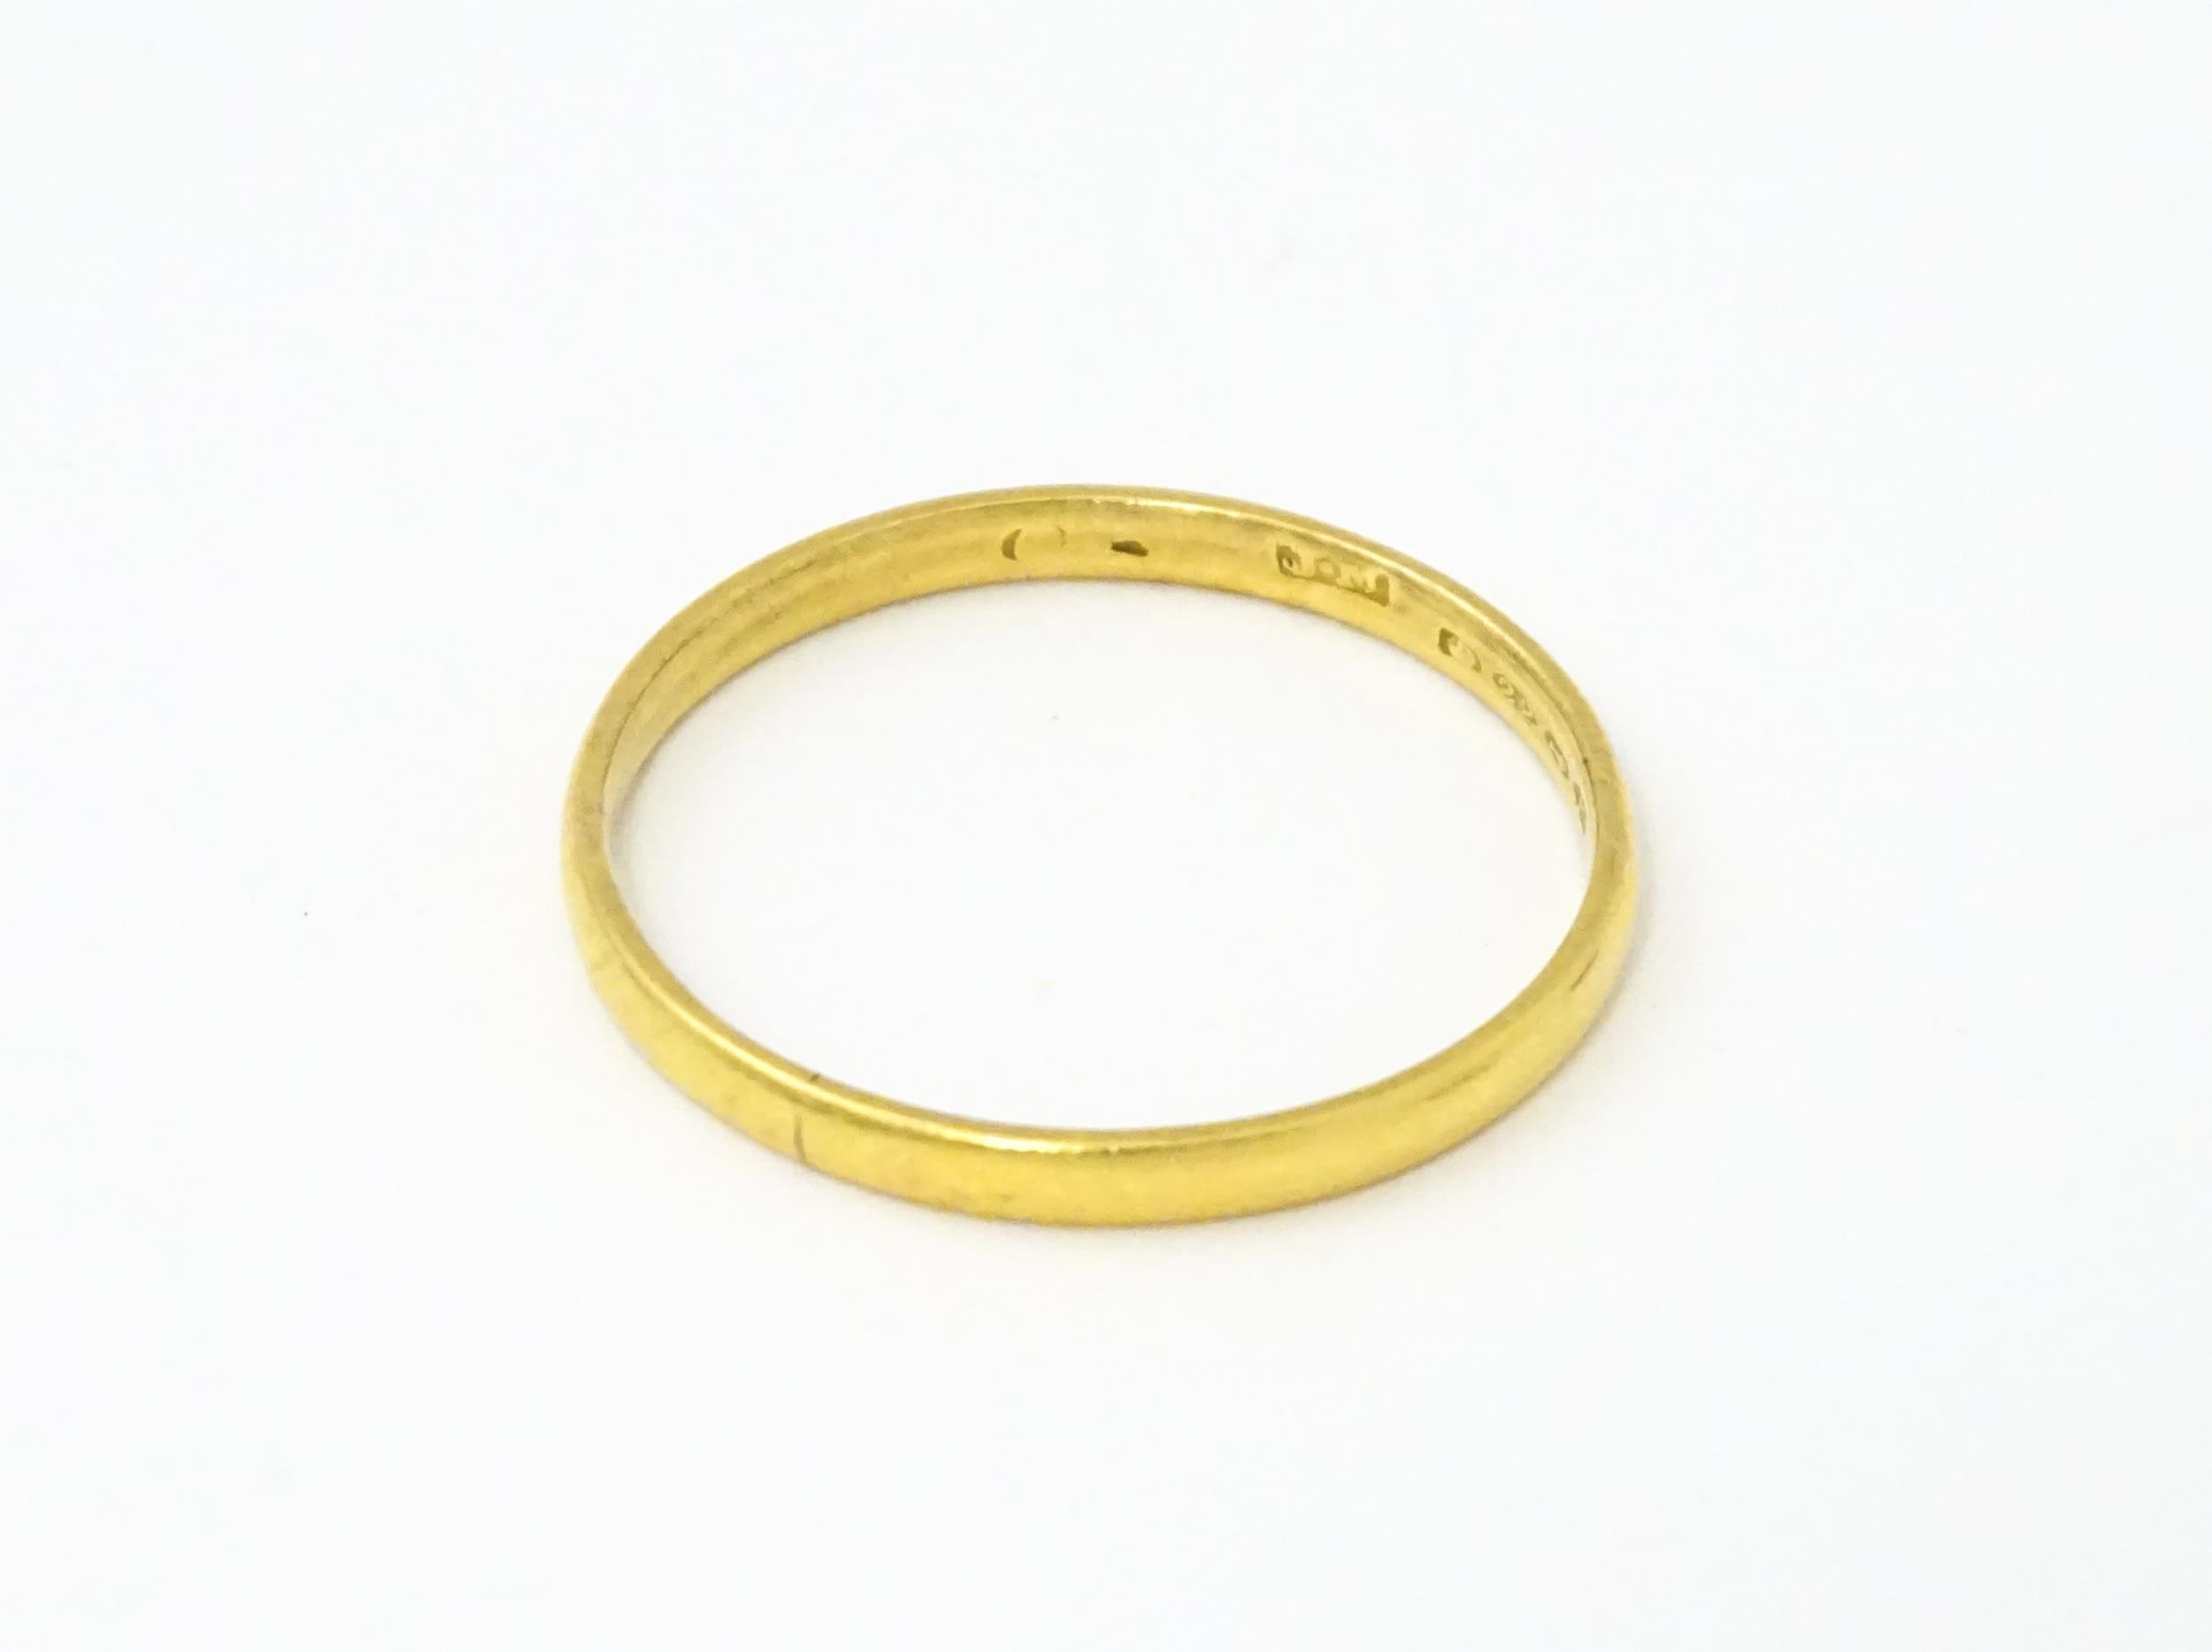 A 22ct gold ring. Ring size approx. Y. (2.9g approx) Please Note - we do not make reference to the